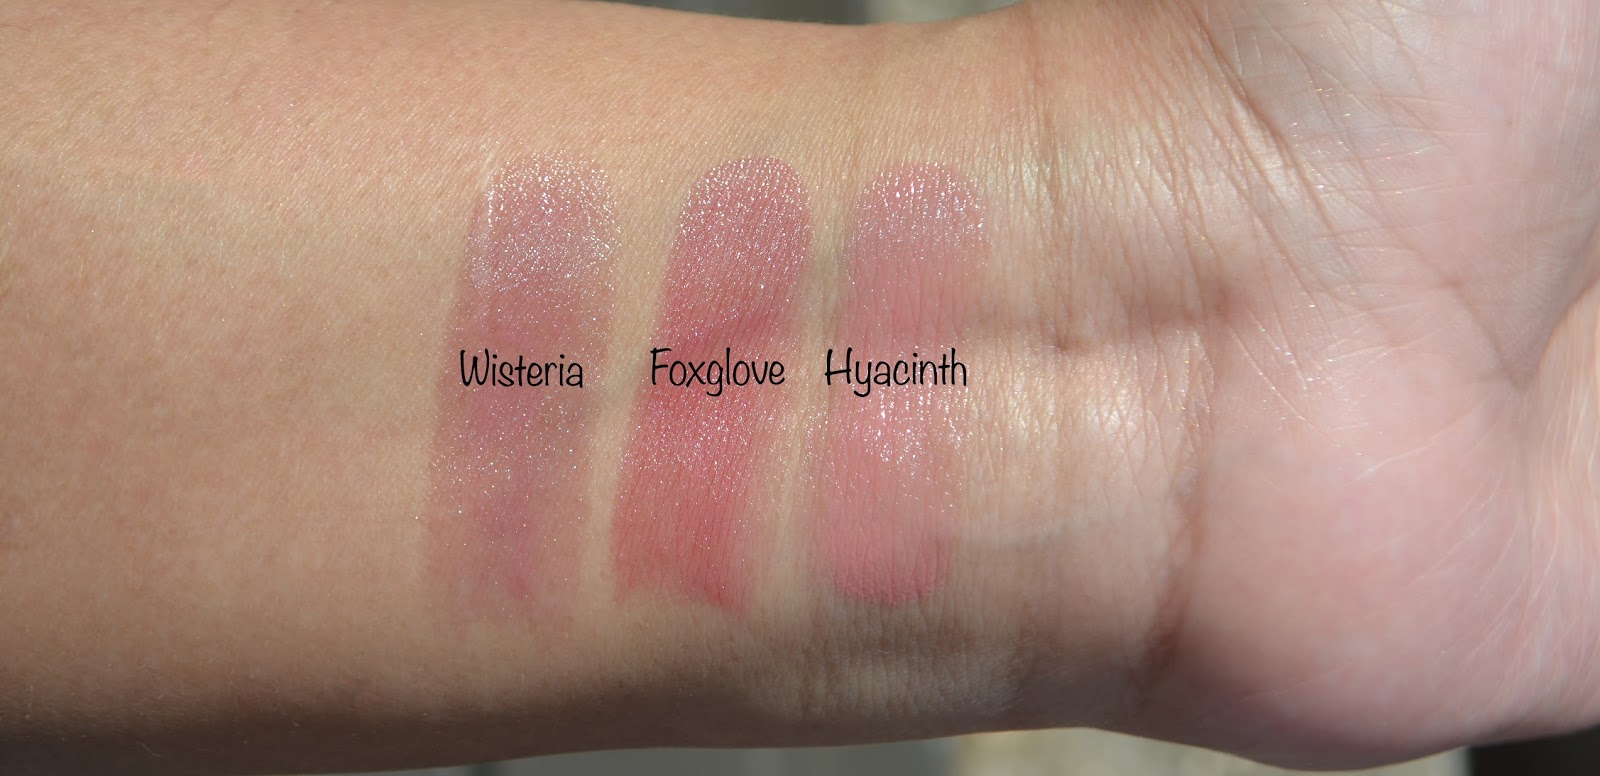 Chantecaille Lip Chic Lip Color Swatches